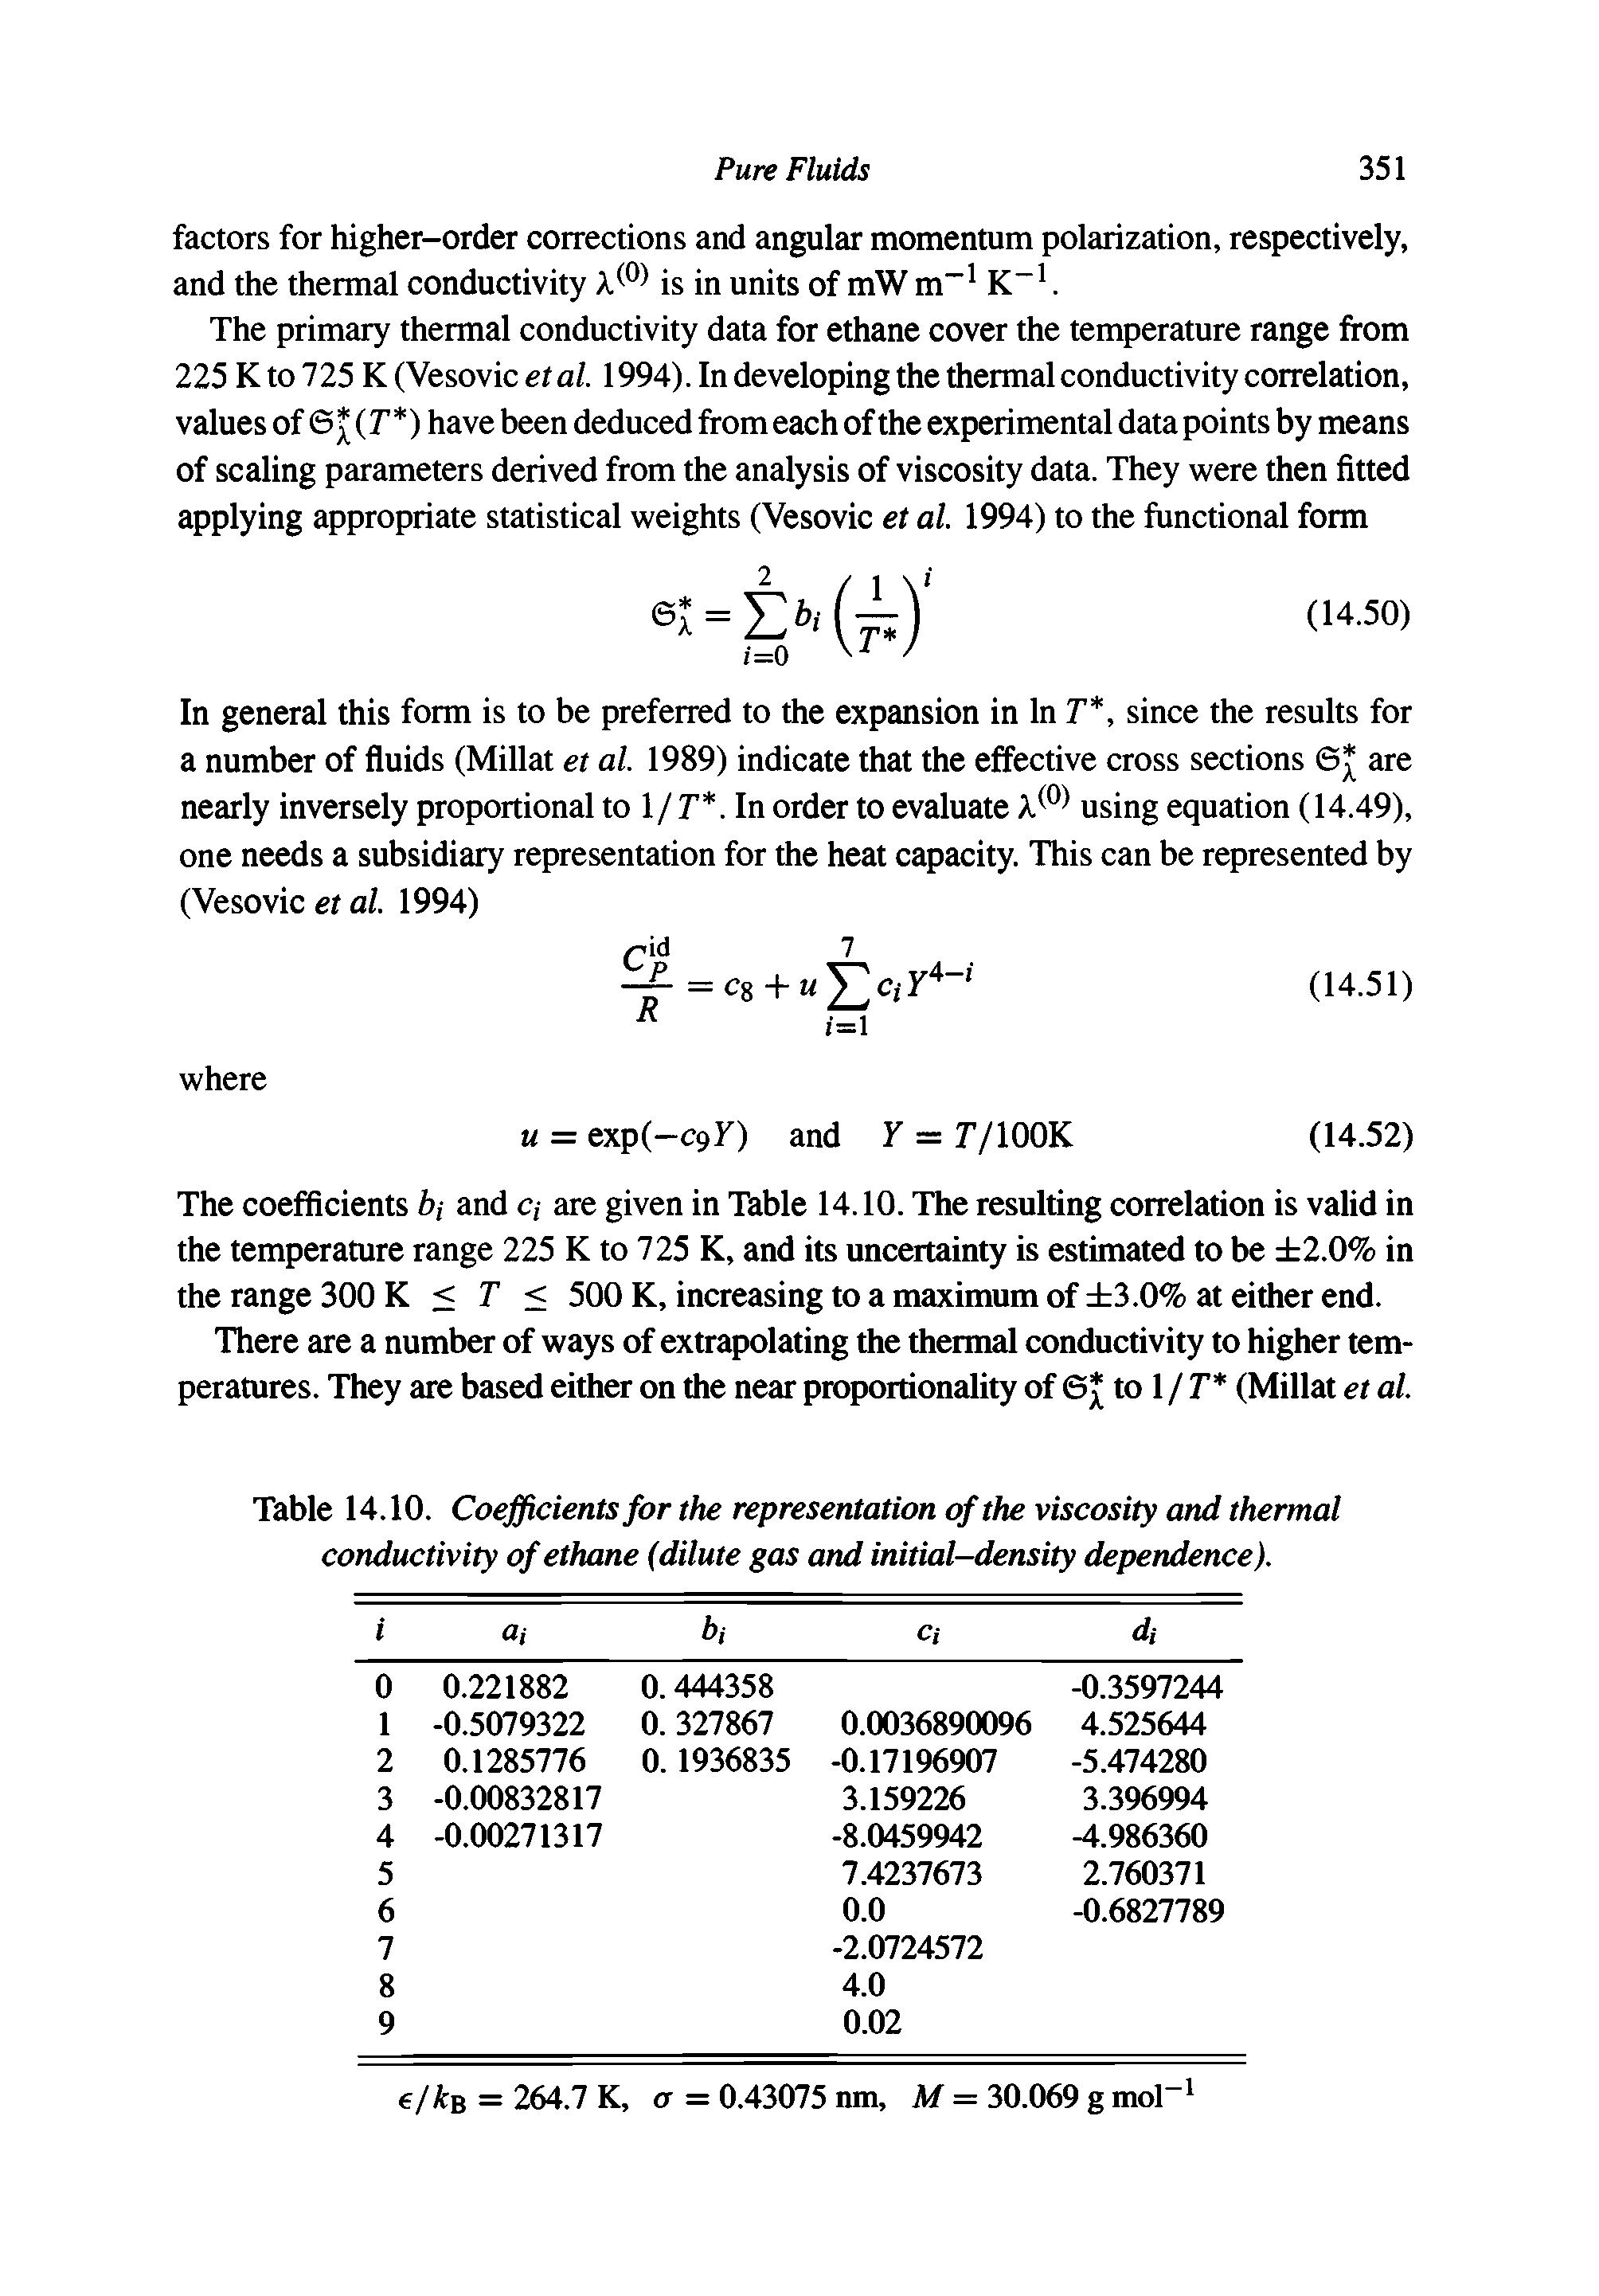 Table 14.10. Coefficients for the representation of the viscosity and thermal conductivity of ethane (dilute gas and initial-density dependence).